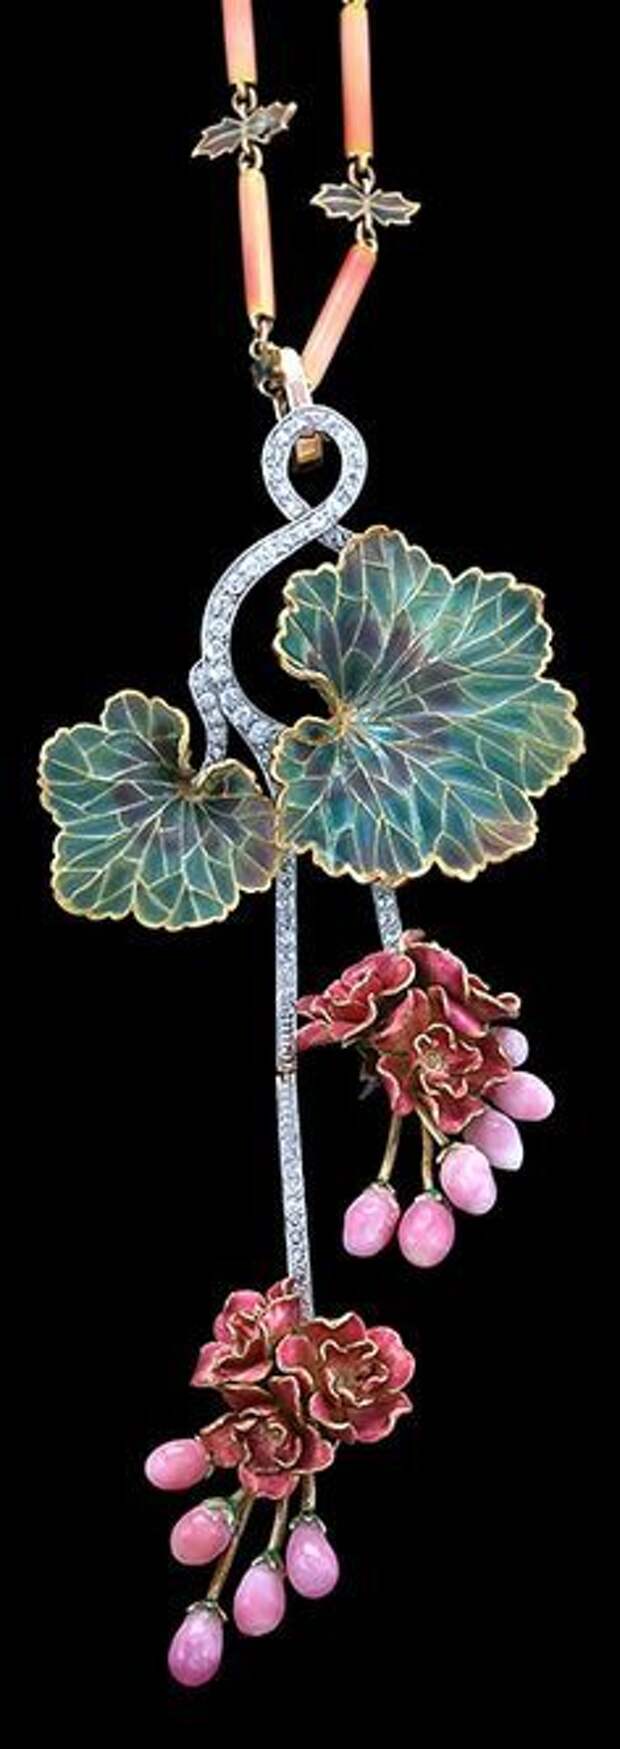 An Art Nouveau 18 karat gold, diamond, conch pearl and plique-а-jour enamel ‘Morning Glory’ necklace, attributed to Marcus & Co., circa 1900.